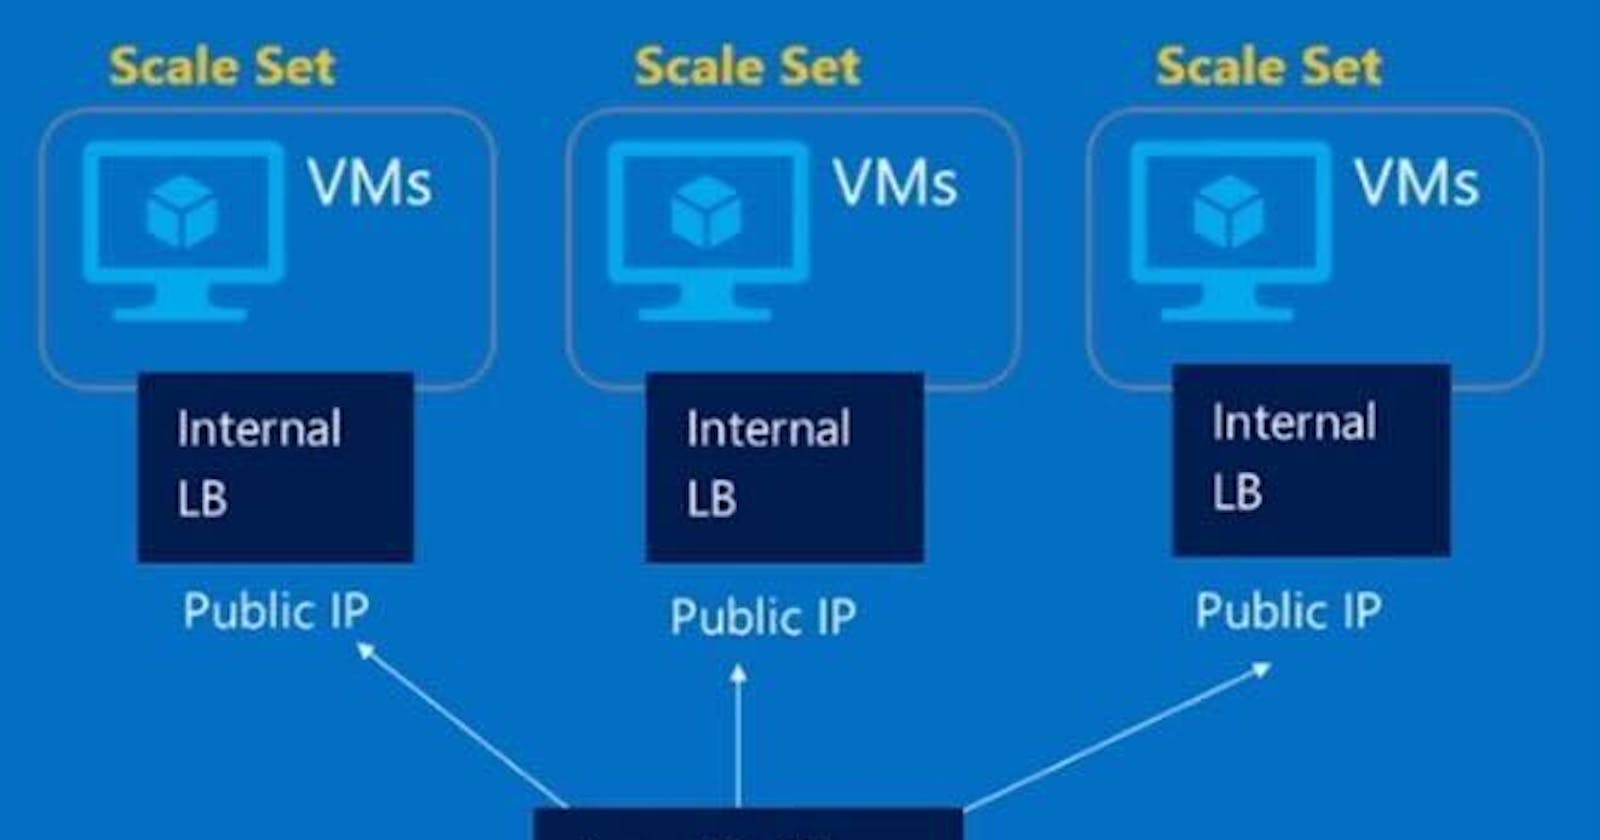 Achieving High Availability with the Virtual Machine Scale Set.